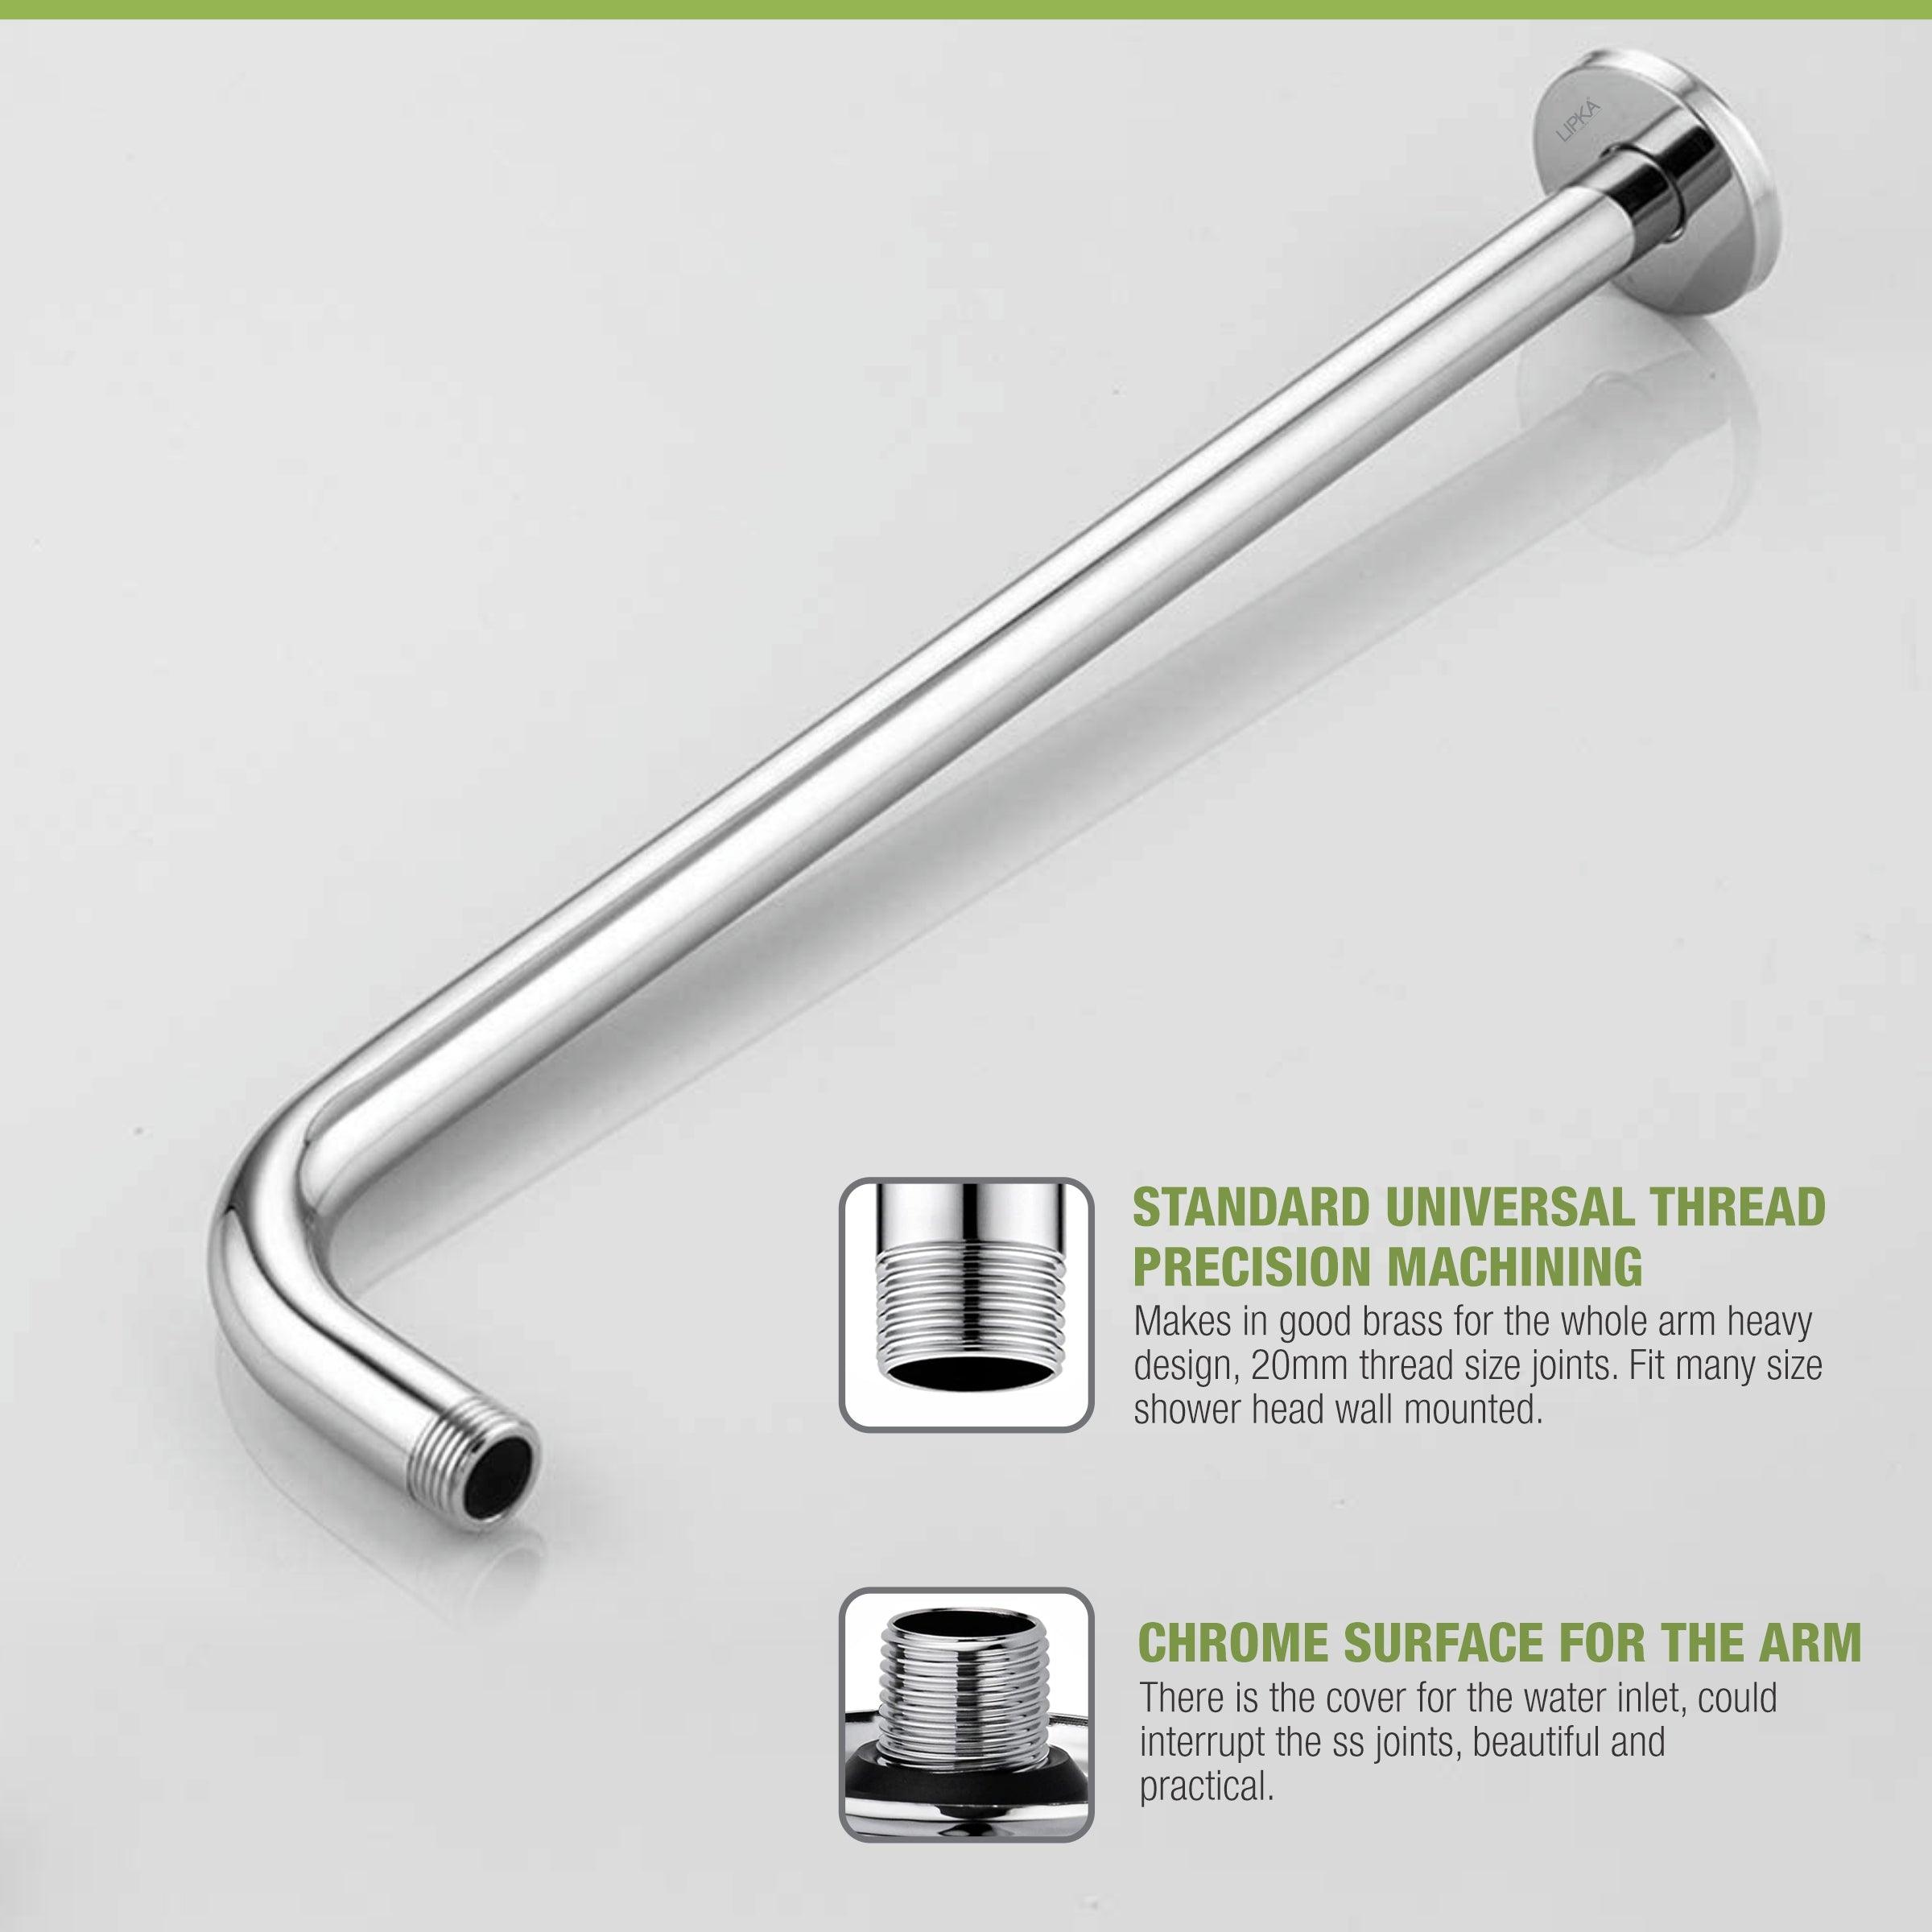 Full Bend Round Shower Arm (15 Inches) features